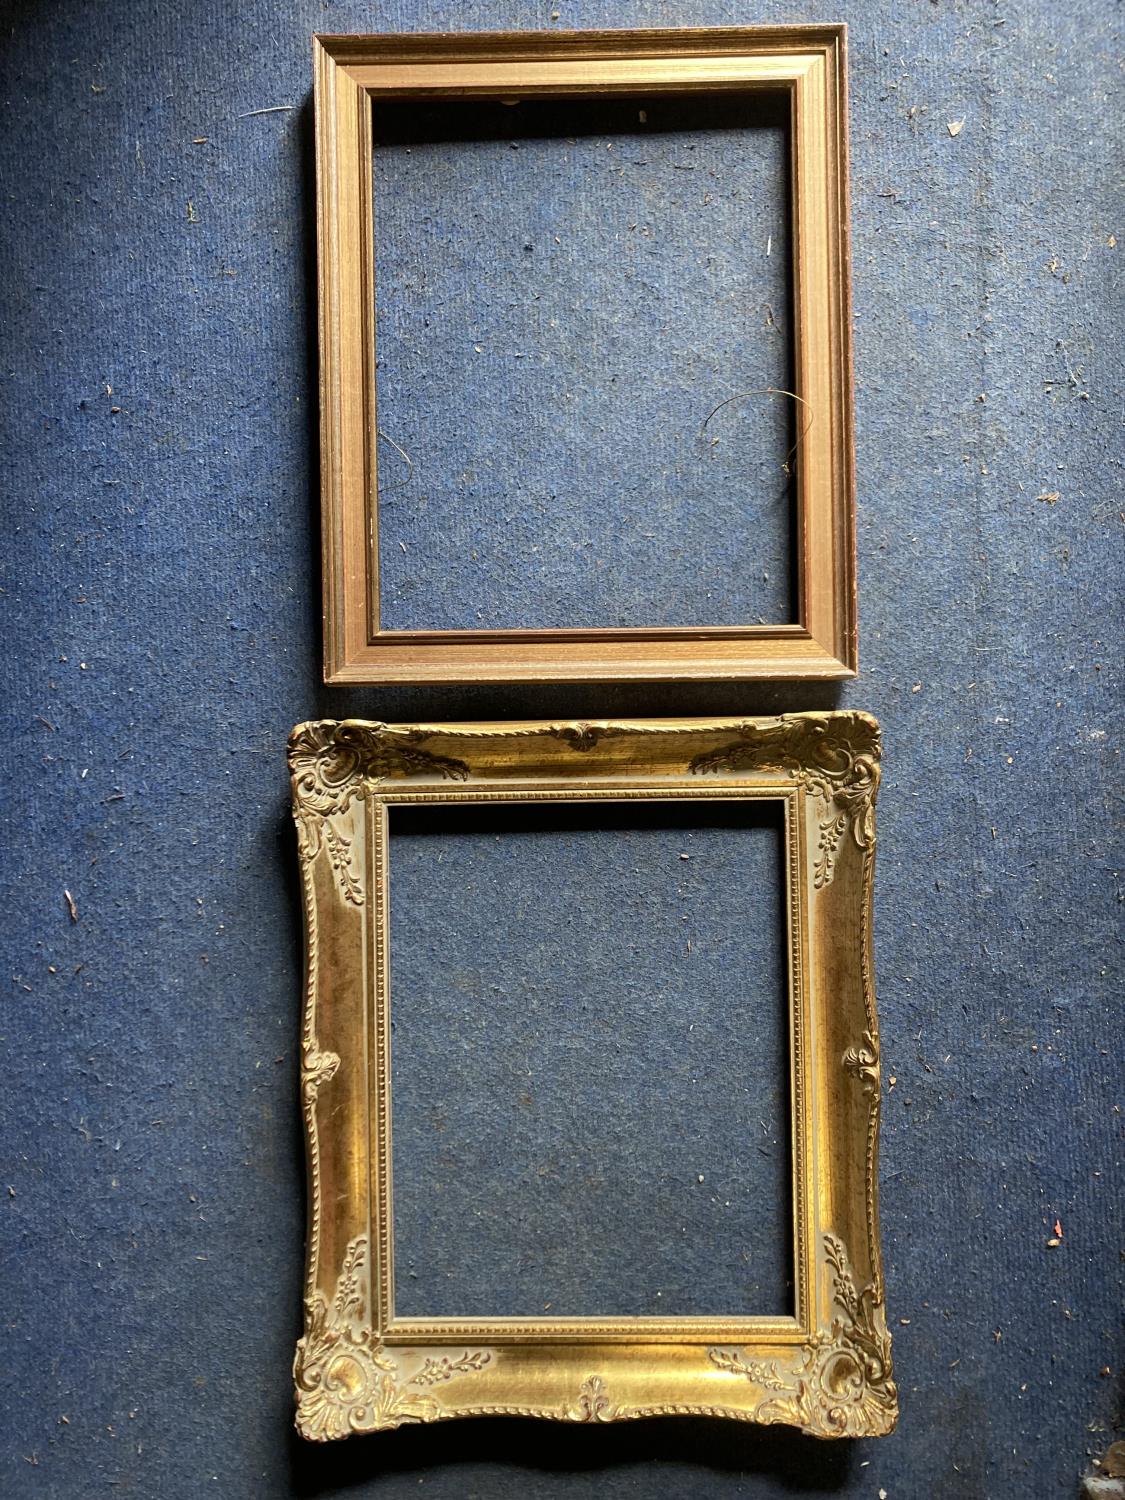 TWO PICTURE FRAMES TO INCLUDE AN ORNATE GILD AND A WOODEN ONE